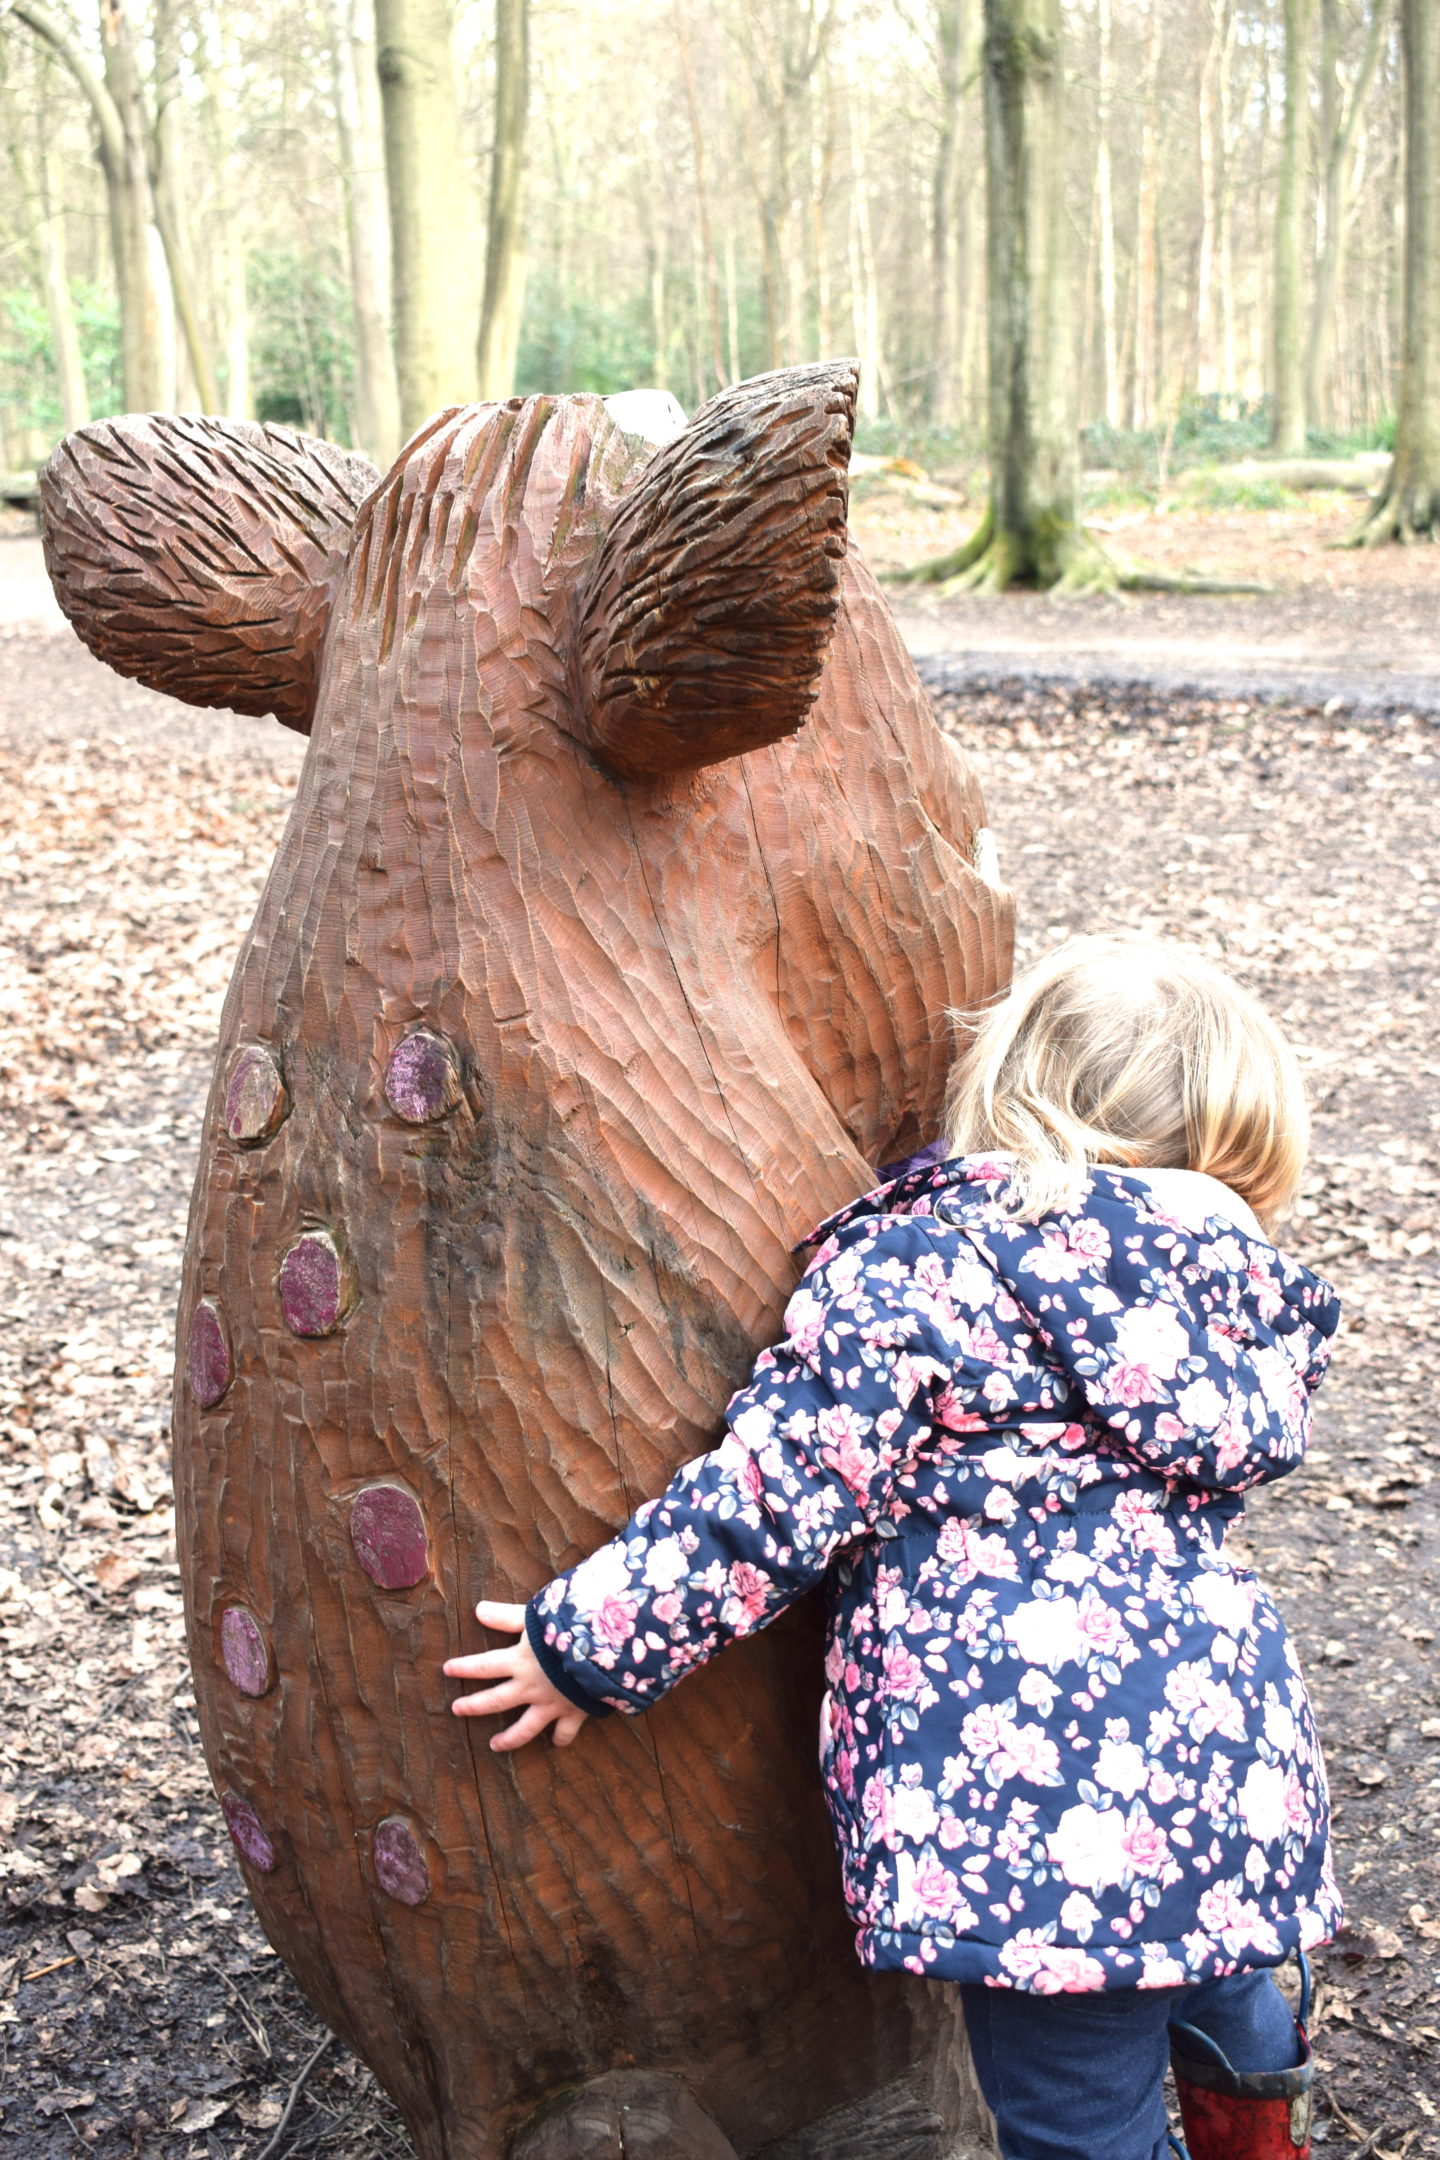 The Gruffalo Trail, Essex, Gruffalo's Child from behind with little girl cuddling it